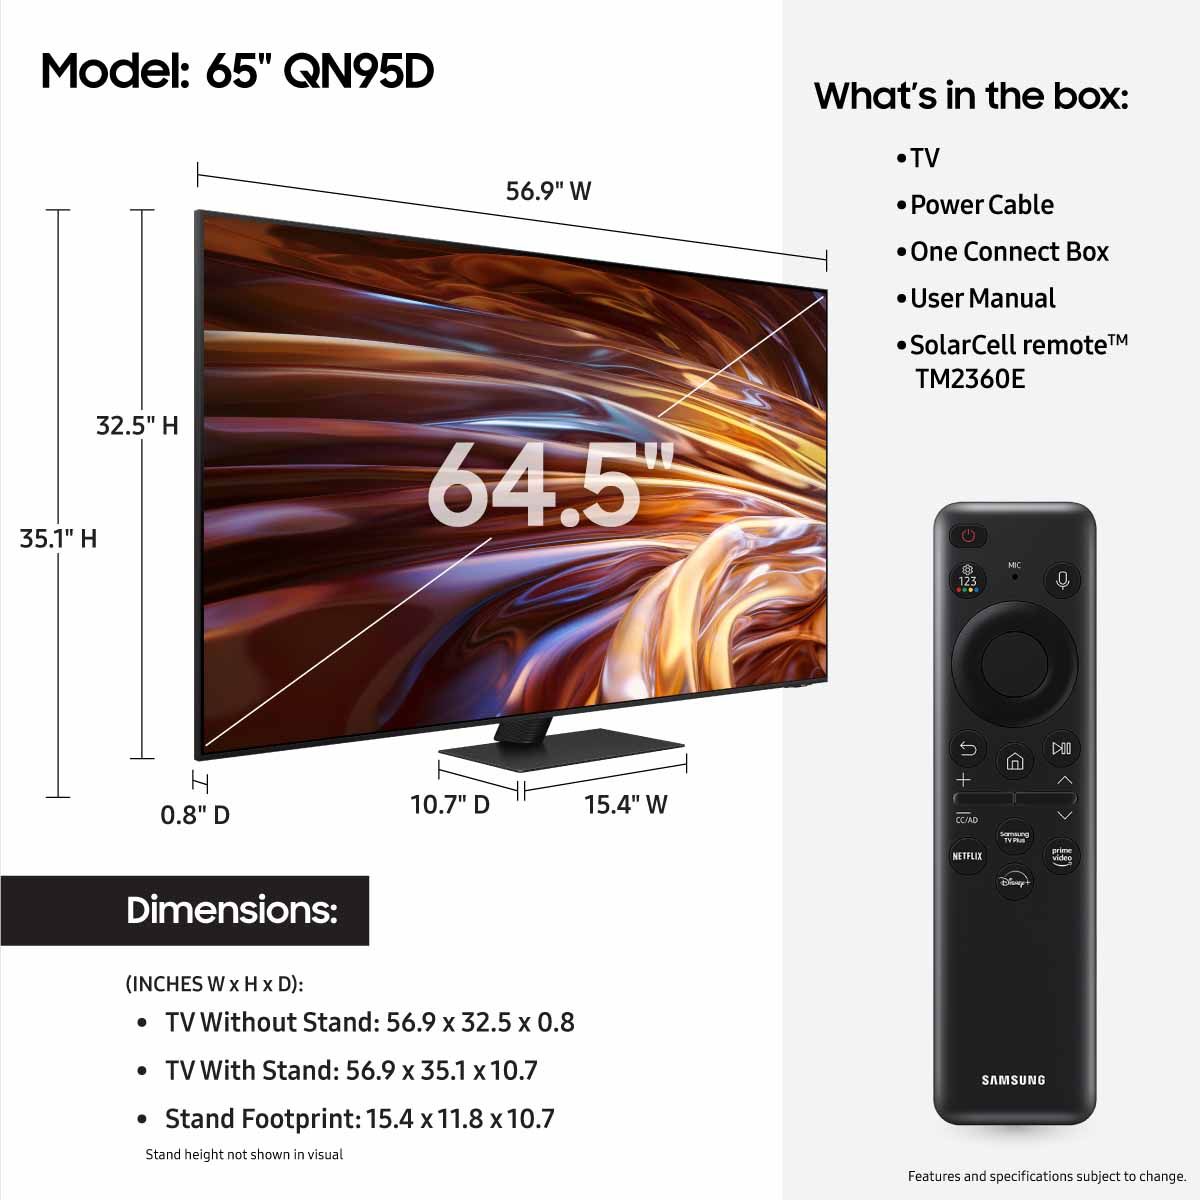 Samsung QN95D Neo QLED 4K Smart TV - 65" - dimensions and what's in the box